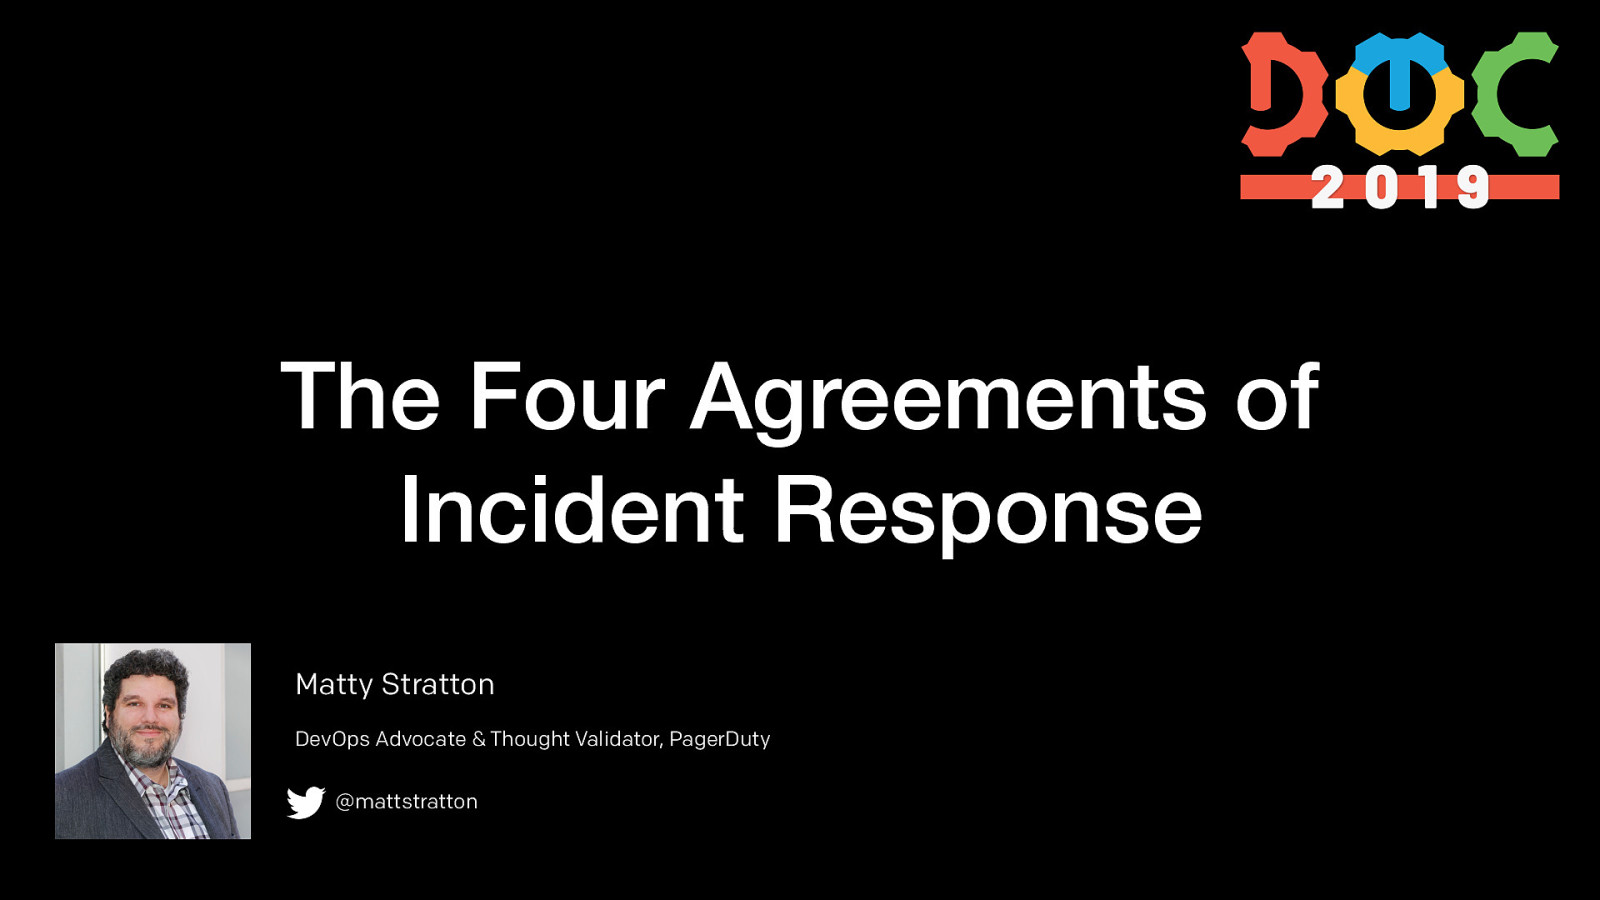 The Four Agreements of Incident Response